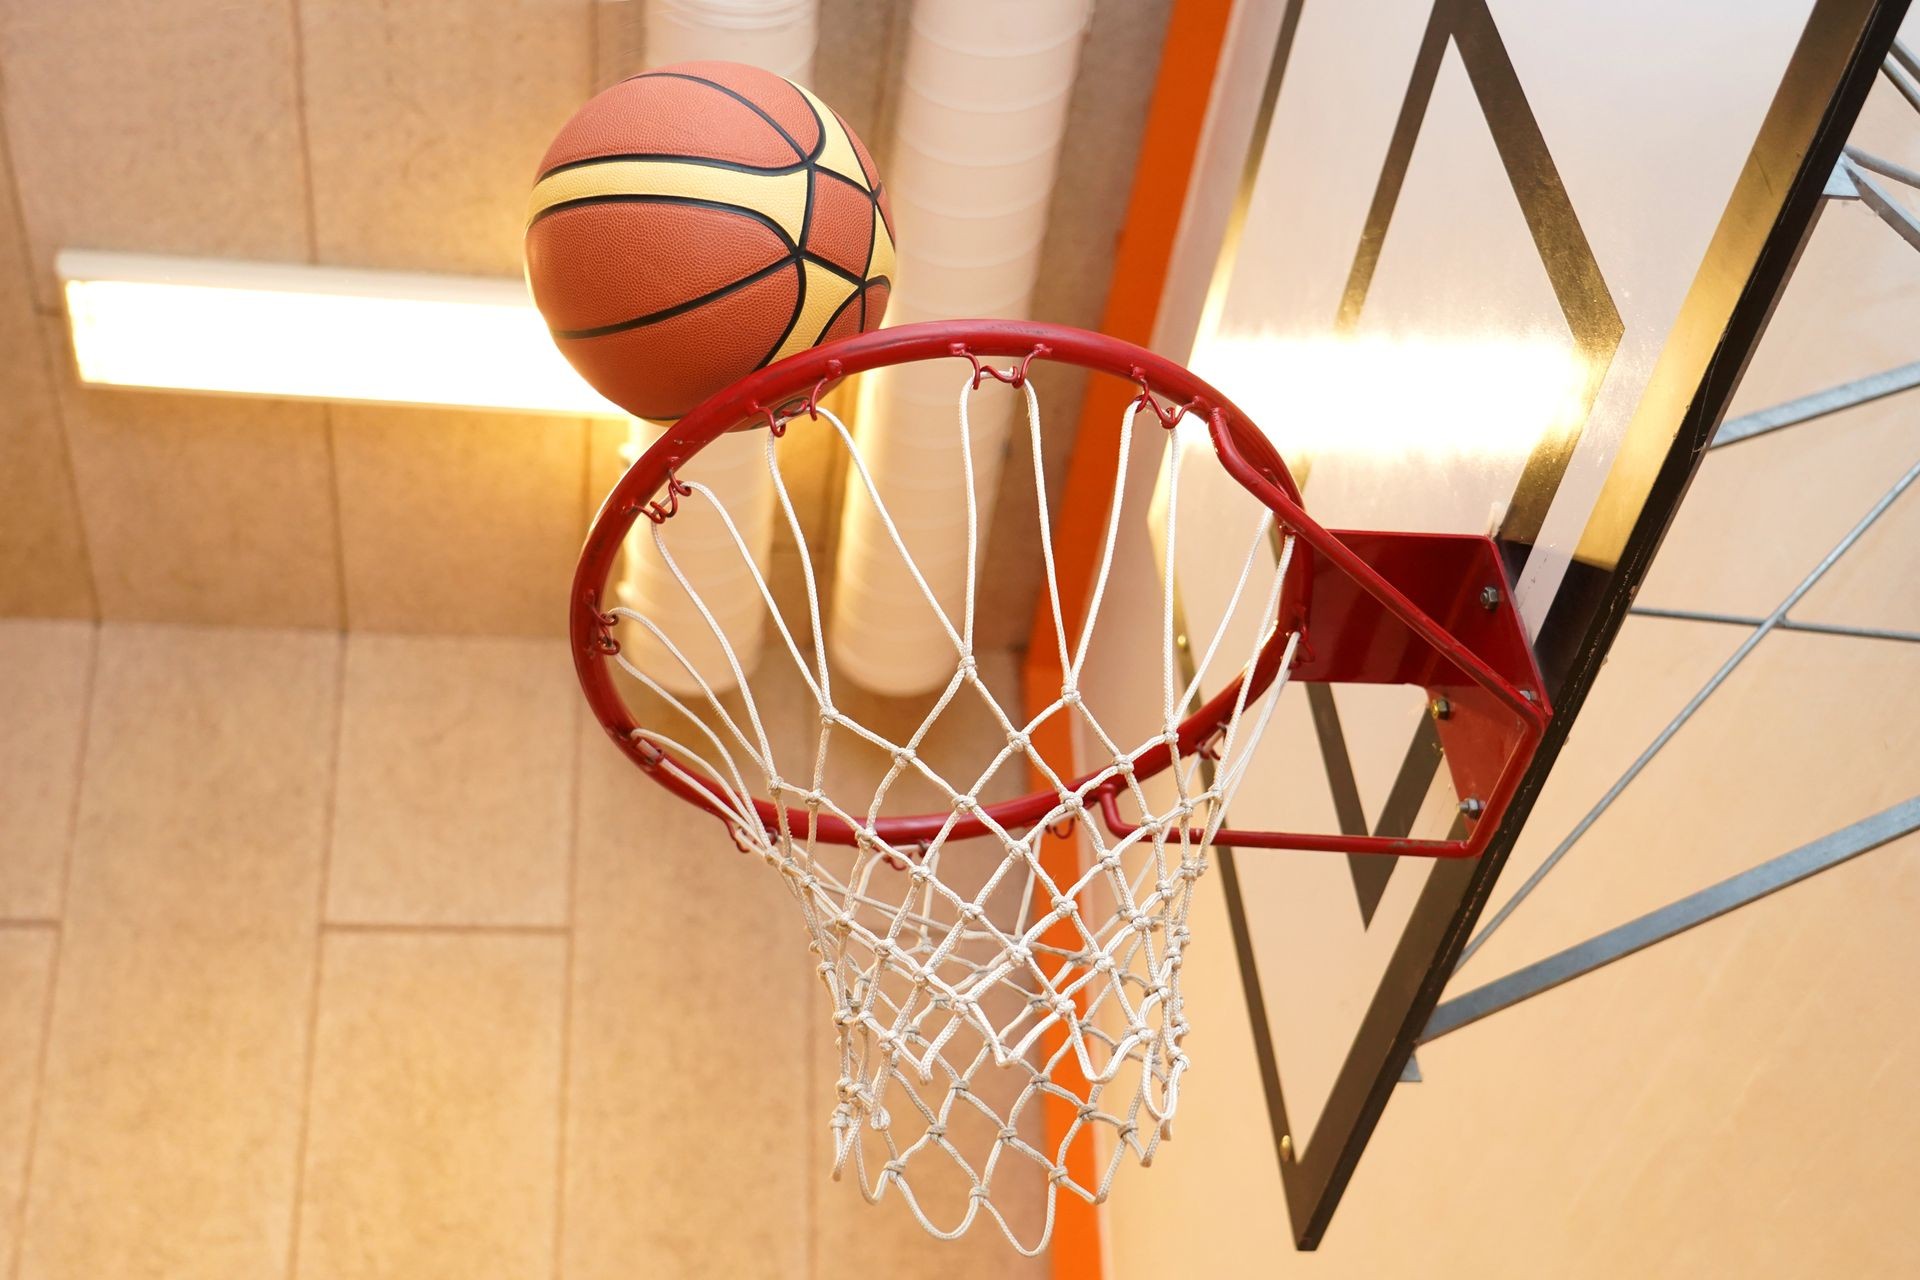 Basketball hoop and basket ball  in a sportshall.